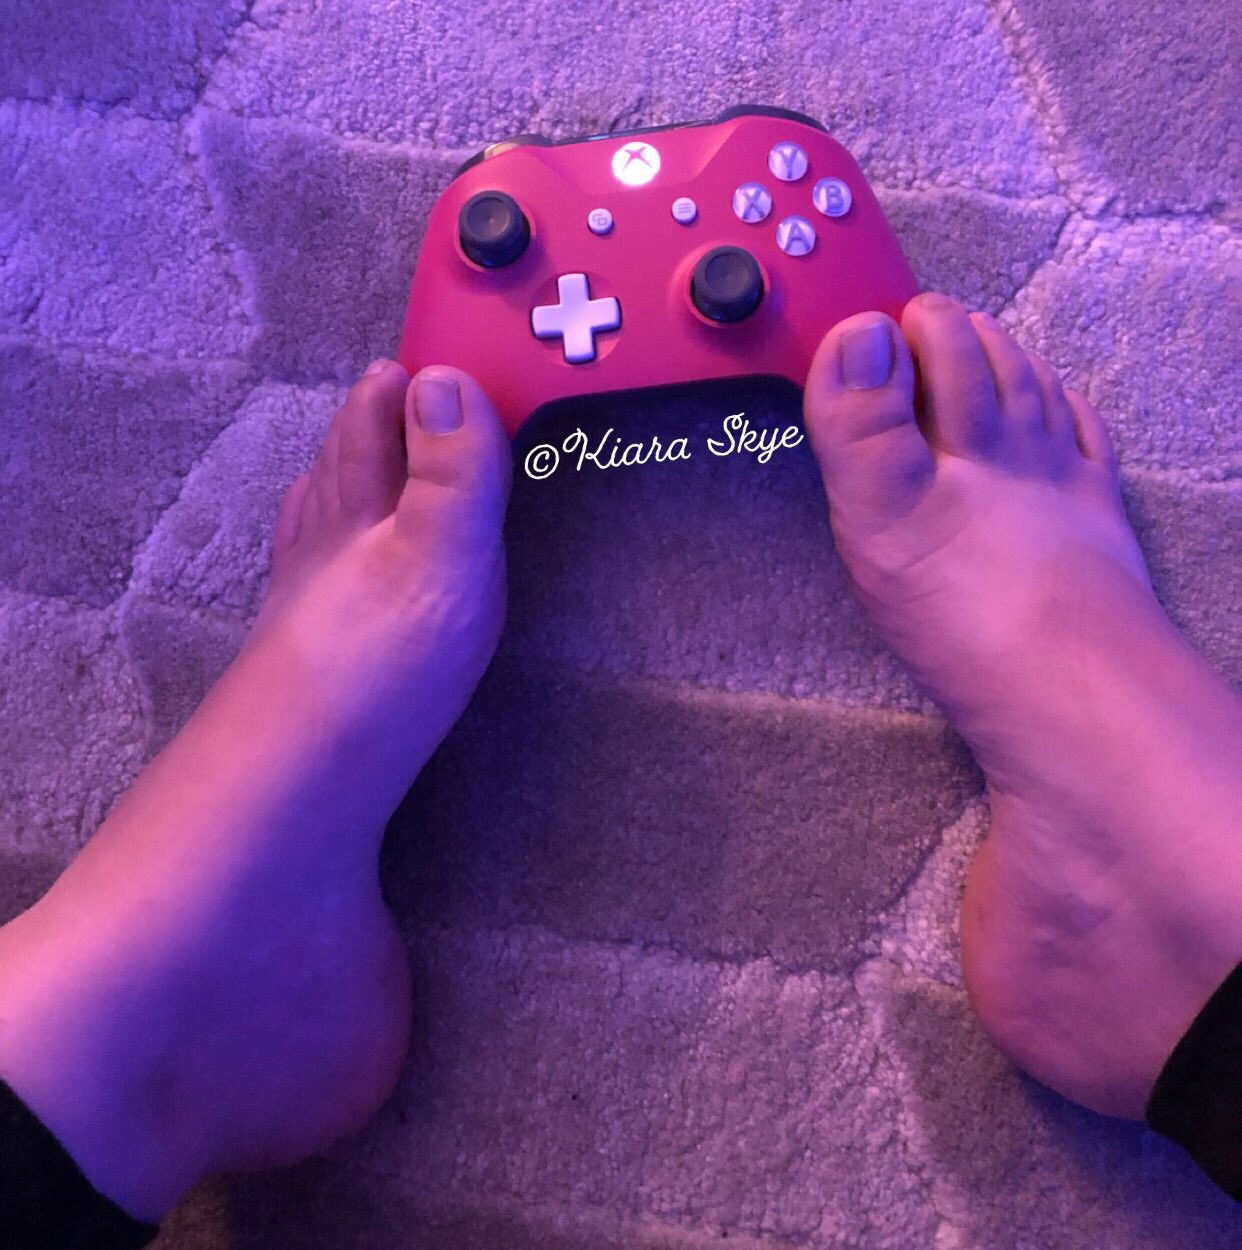 Photo by Kiara Skye with the username @KiaraSkye, who is a star user,  June 30, 2019 at 11:32 PM and the text says 'See the rest of this set on my OF! 💋

HTTPS://ONLYFANS.COM/KITTENKIARACB 

#feet #naturaltoenails #smallfeet #footfetish #footjob #pawg #gamer #nerd #xbox #pedicure #cutetoes #'